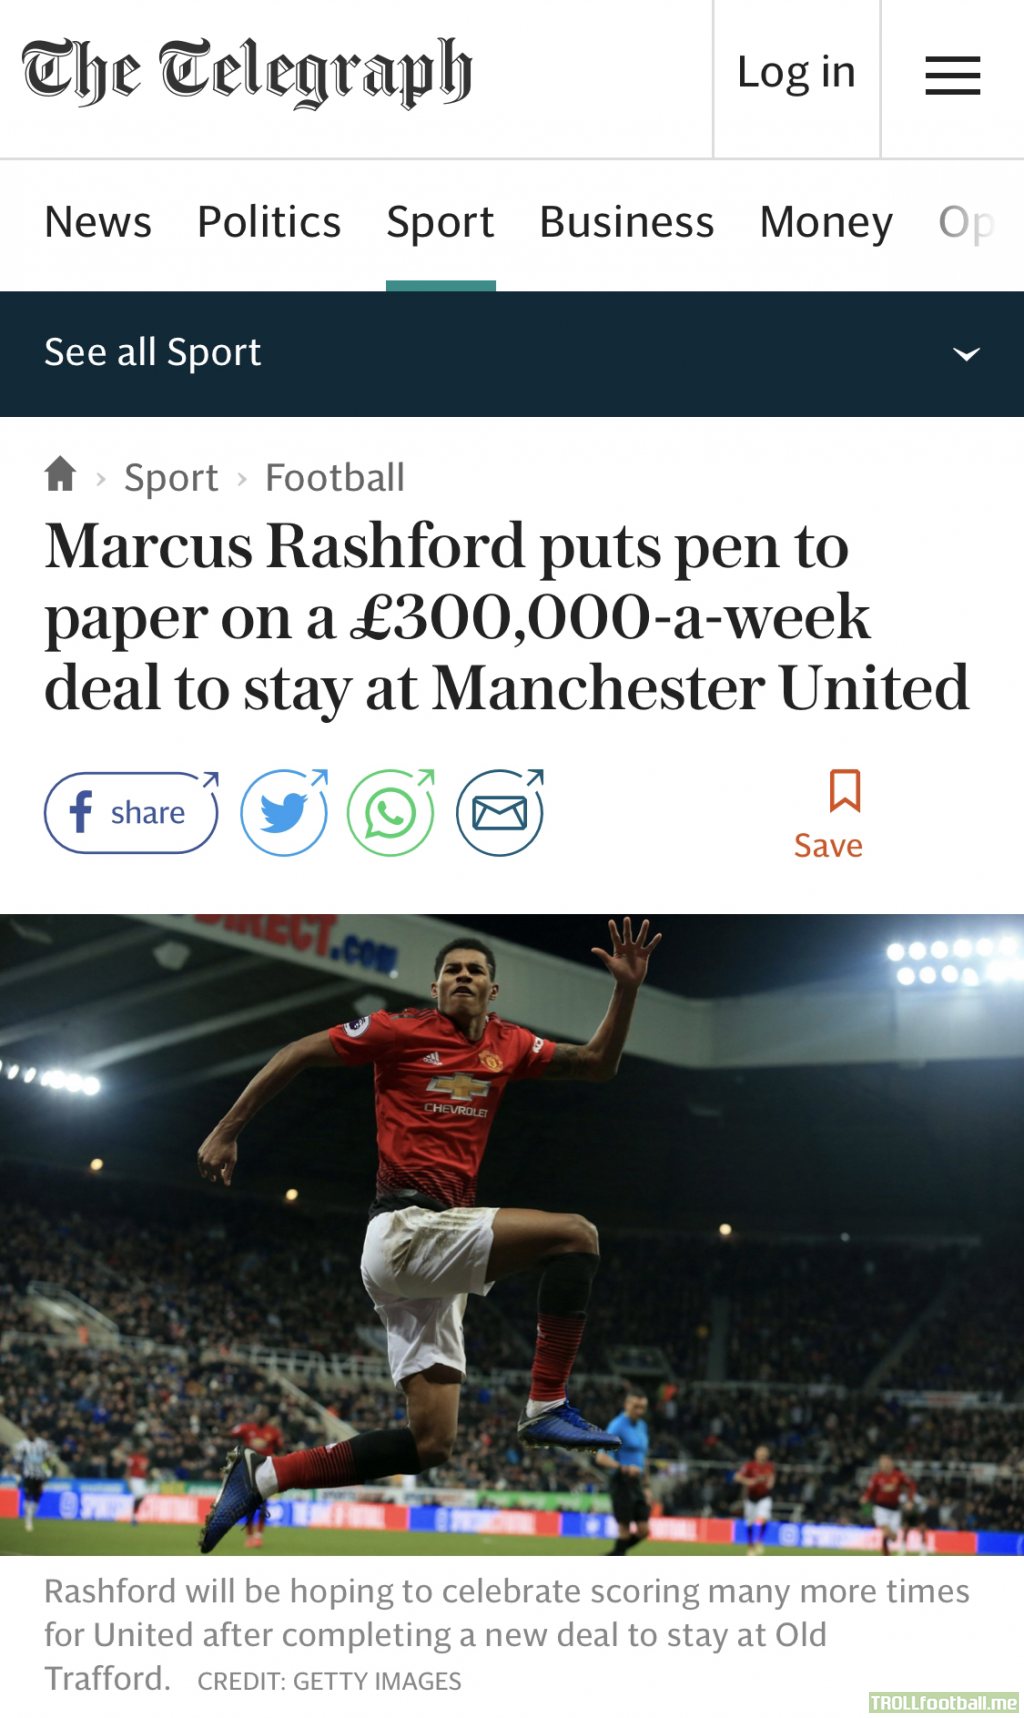 [Telegraph] There’s a possibility United could announce Marcus Rashford’s new contract as early as tomorrow (Monday). It’s a 4 year deal with the option of a fifth year.